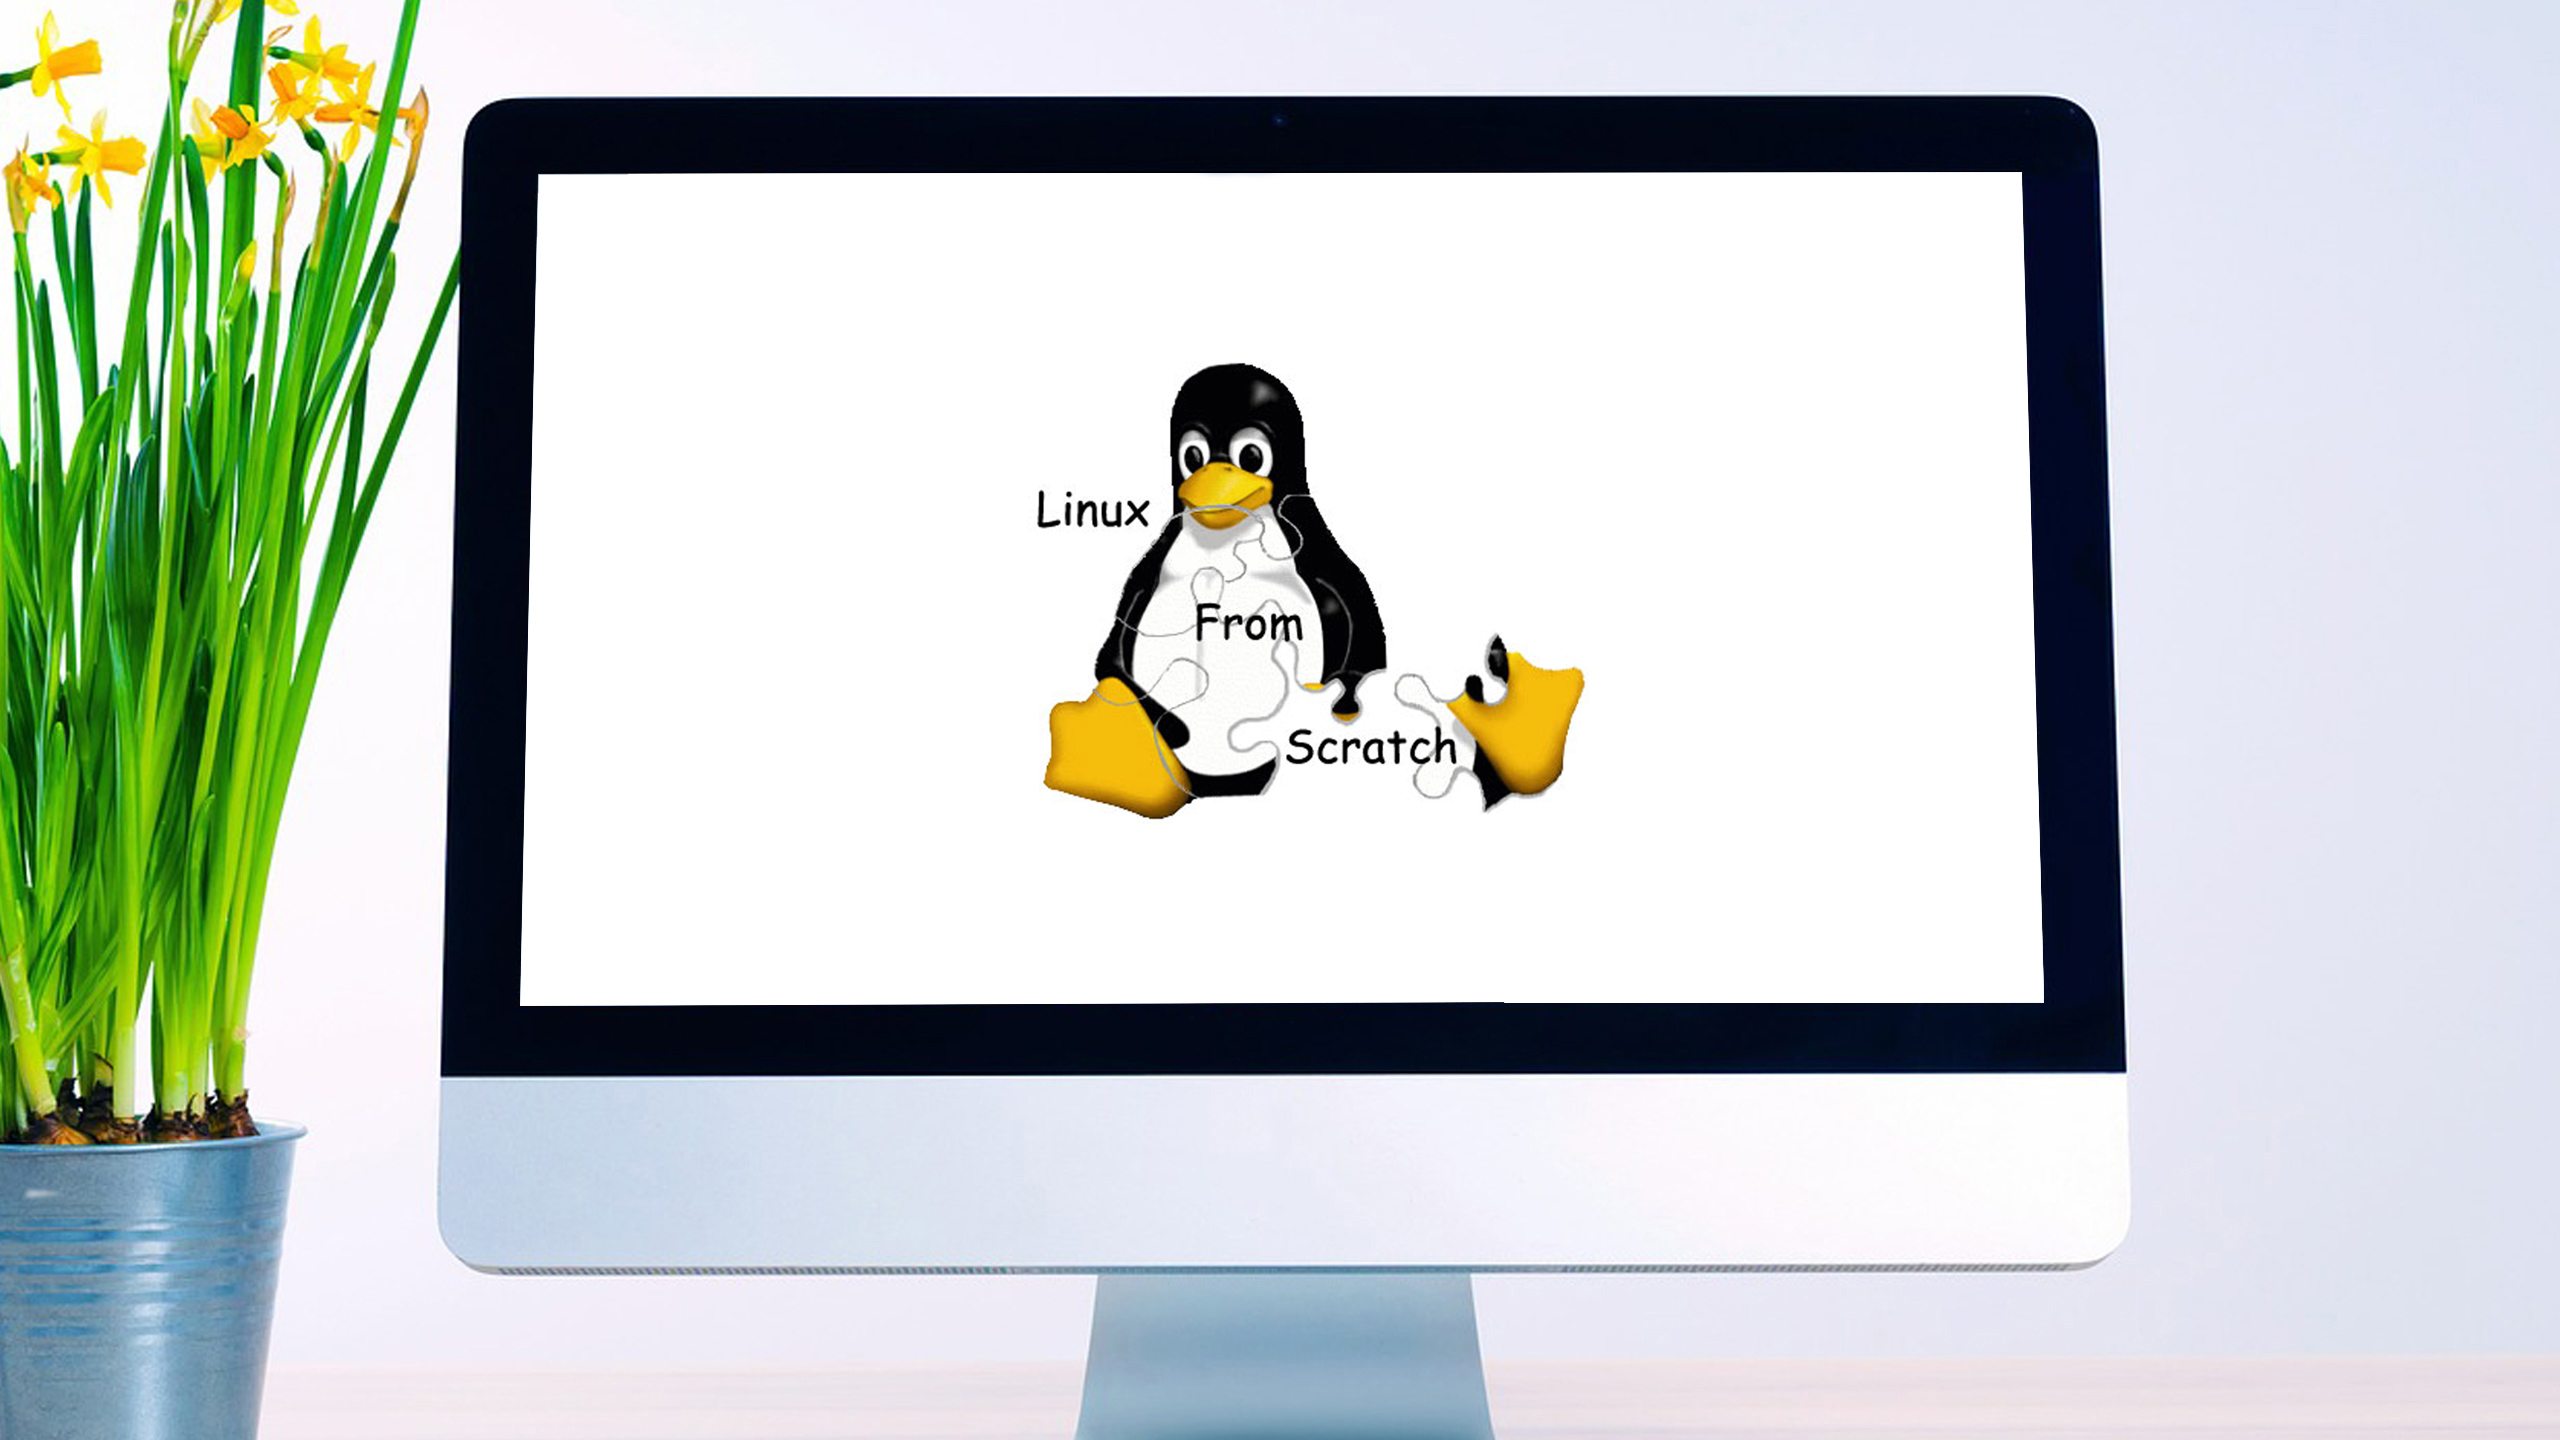 linux from scratch